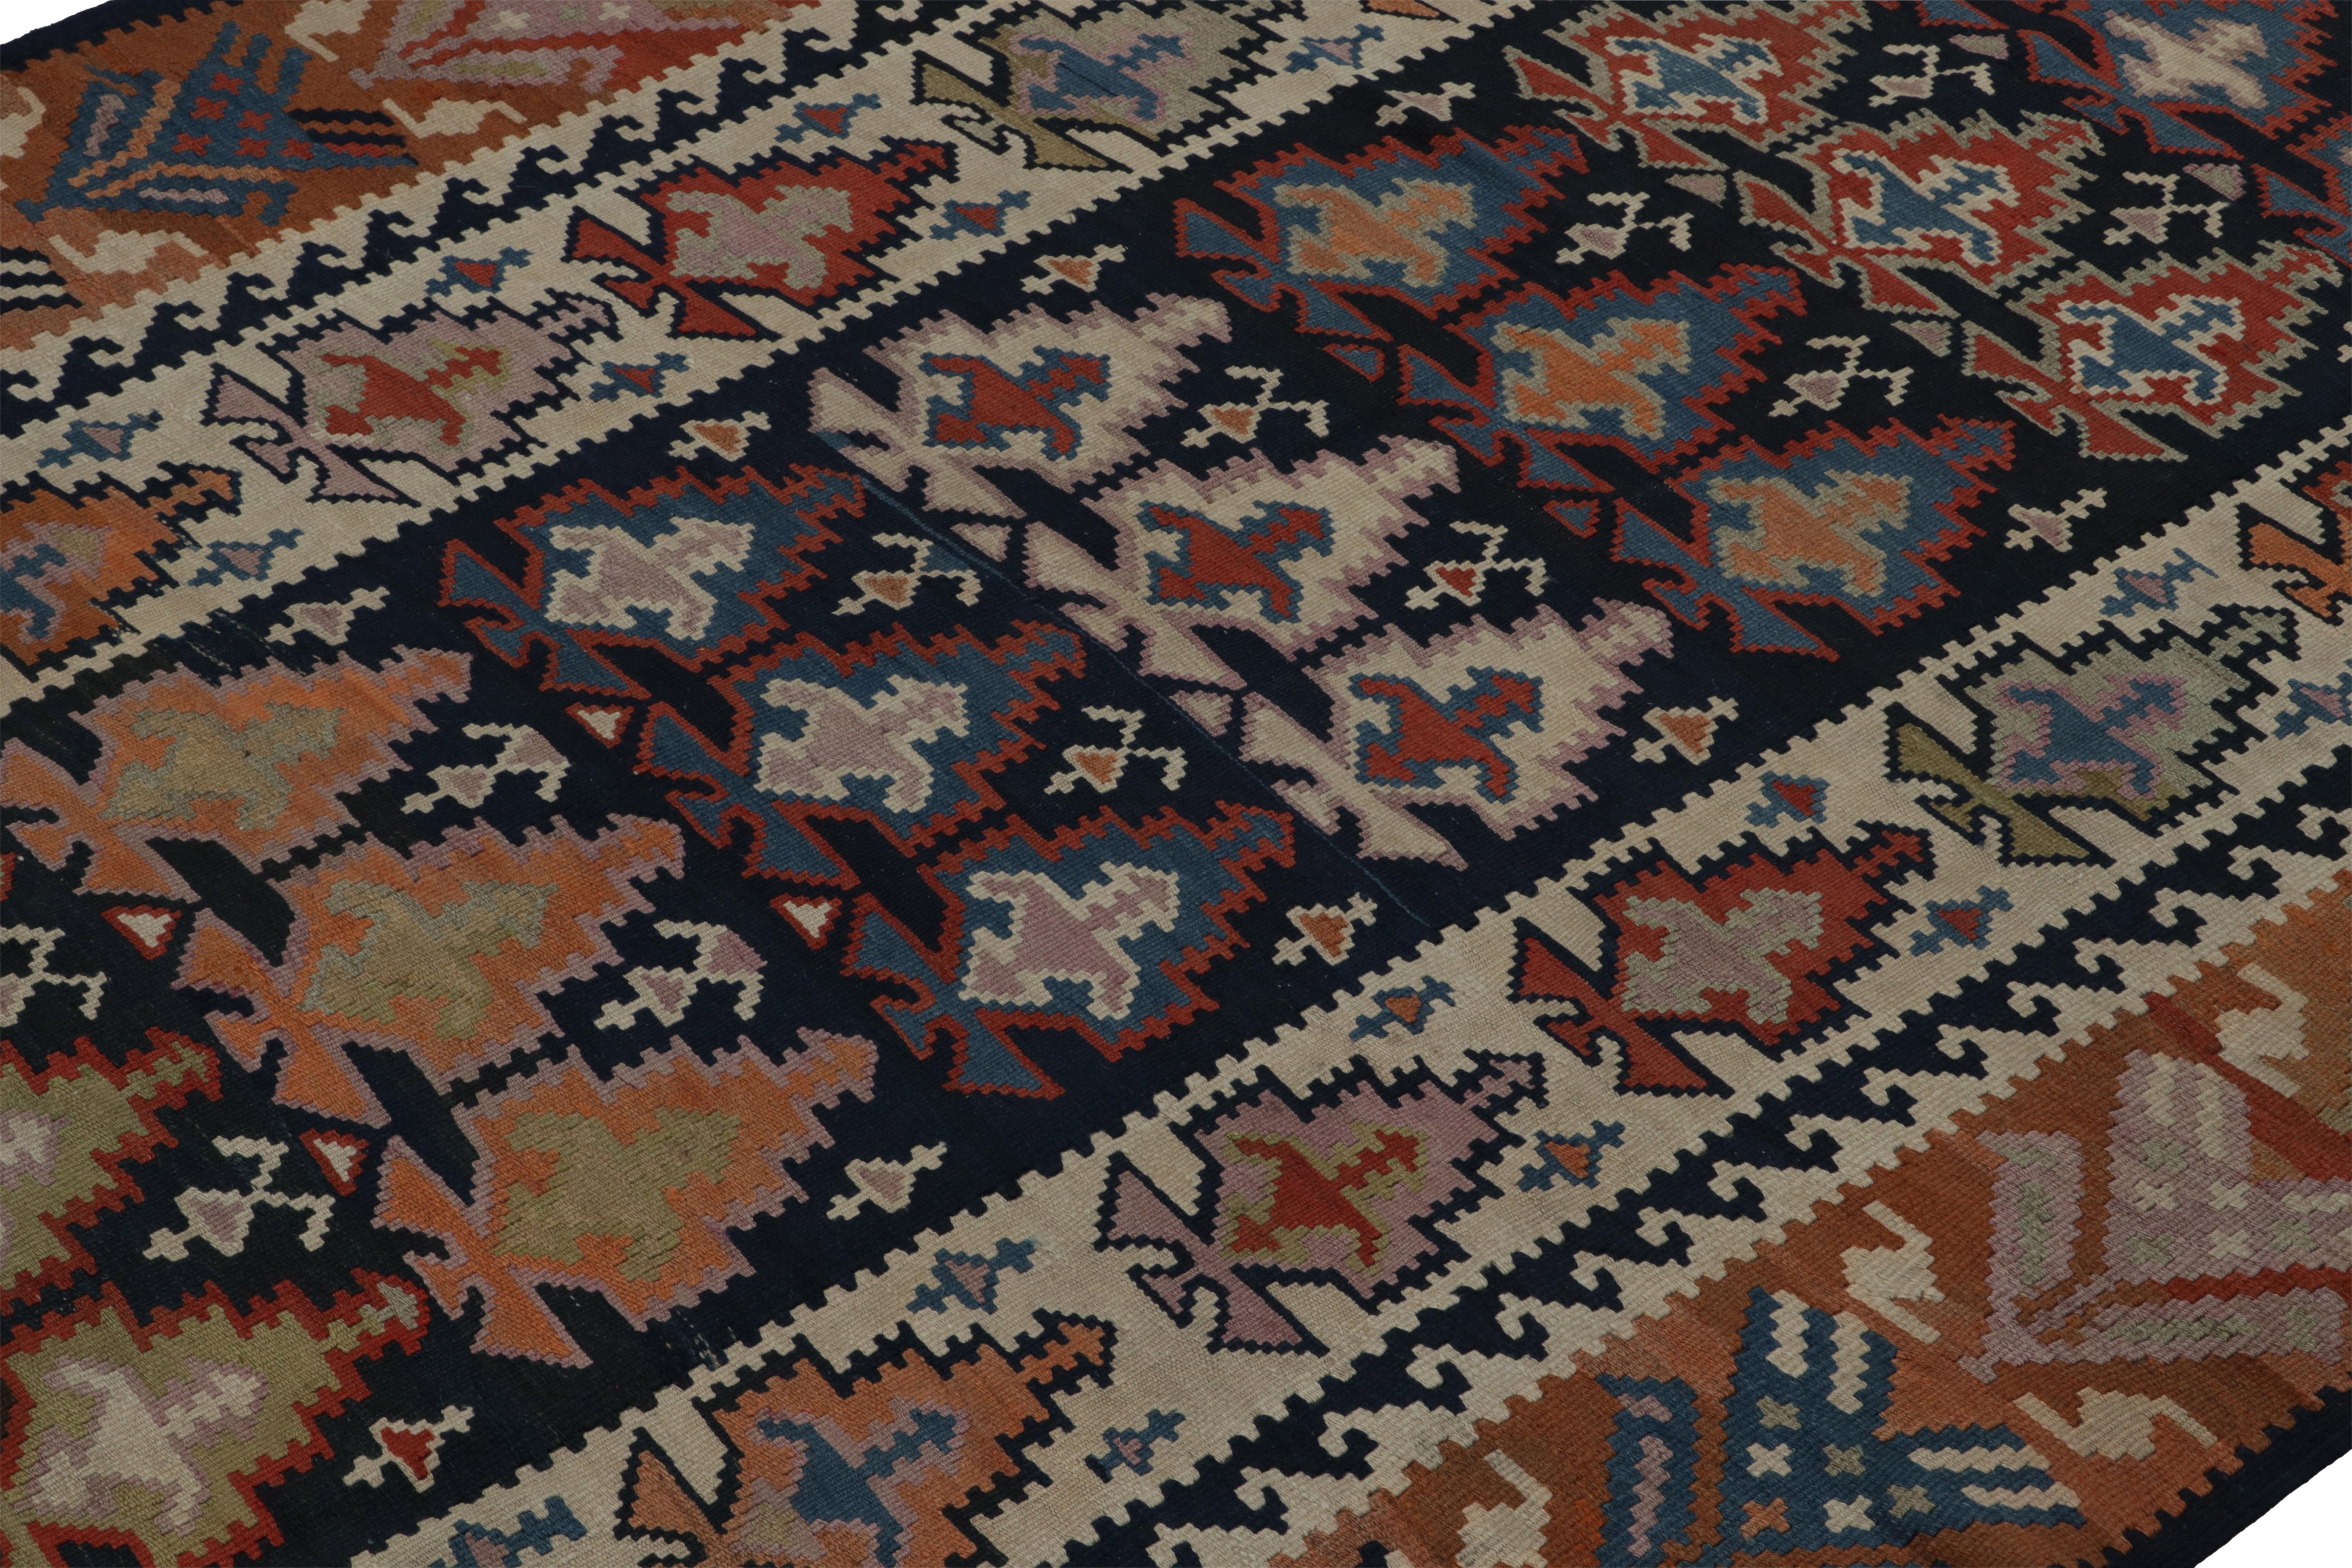 Hand-Woven Vintage Tribal Kilim in Blue-Brown Geometric Patterns, from Rug & Kilim For Sale